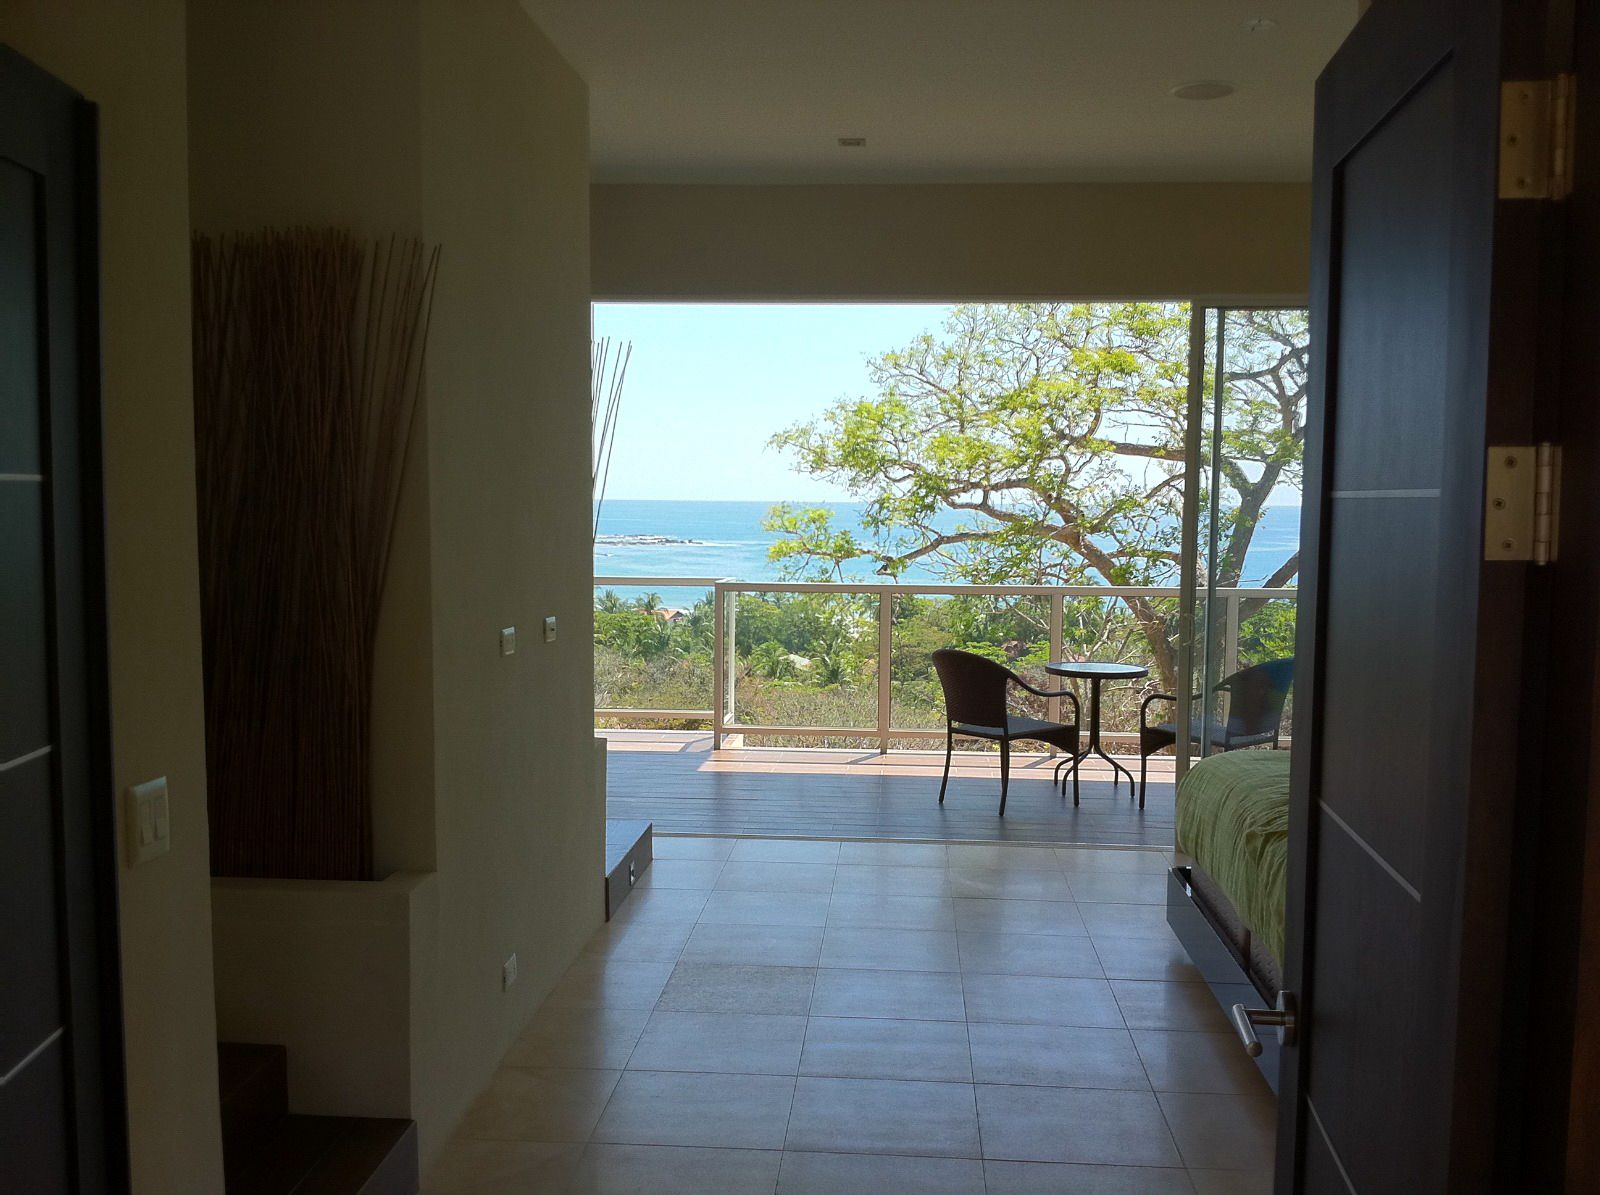 Door open showing a piece of bed and a balcony with 2 chairs and a table with ocean view Samara Reef Condo for sale Samara Guanacaste Costa Rica